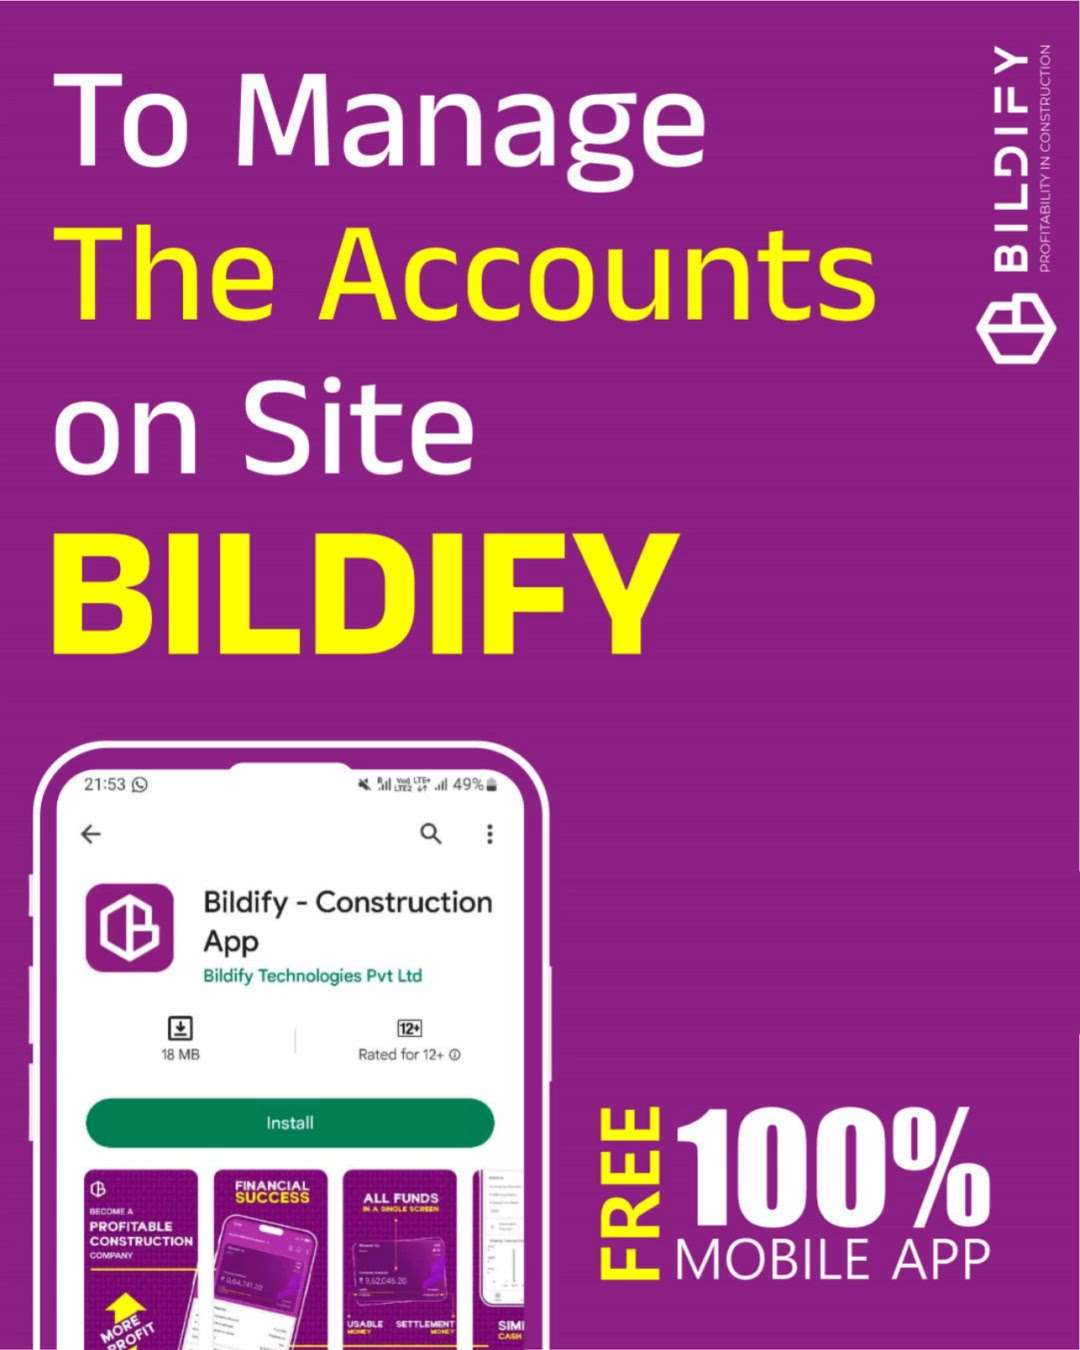 Bildify helps you understand site metrics, staff salaries, daily wages, site progress, and make appropriate financial decisions.

● Increase profits.
● Track all financial activities.
● All construction sites at your fingertips.
● Completely free mobile application.
● Web version with premium features.

This app is now making waves in the construction industry. It has a dedicated helpline to answer all kinds of customer queries.

*Download App* https://link.bildify.in/kolo

*Contact :* +91 85920 51282

 #profit #construction #expenses #site #owner #Contractor